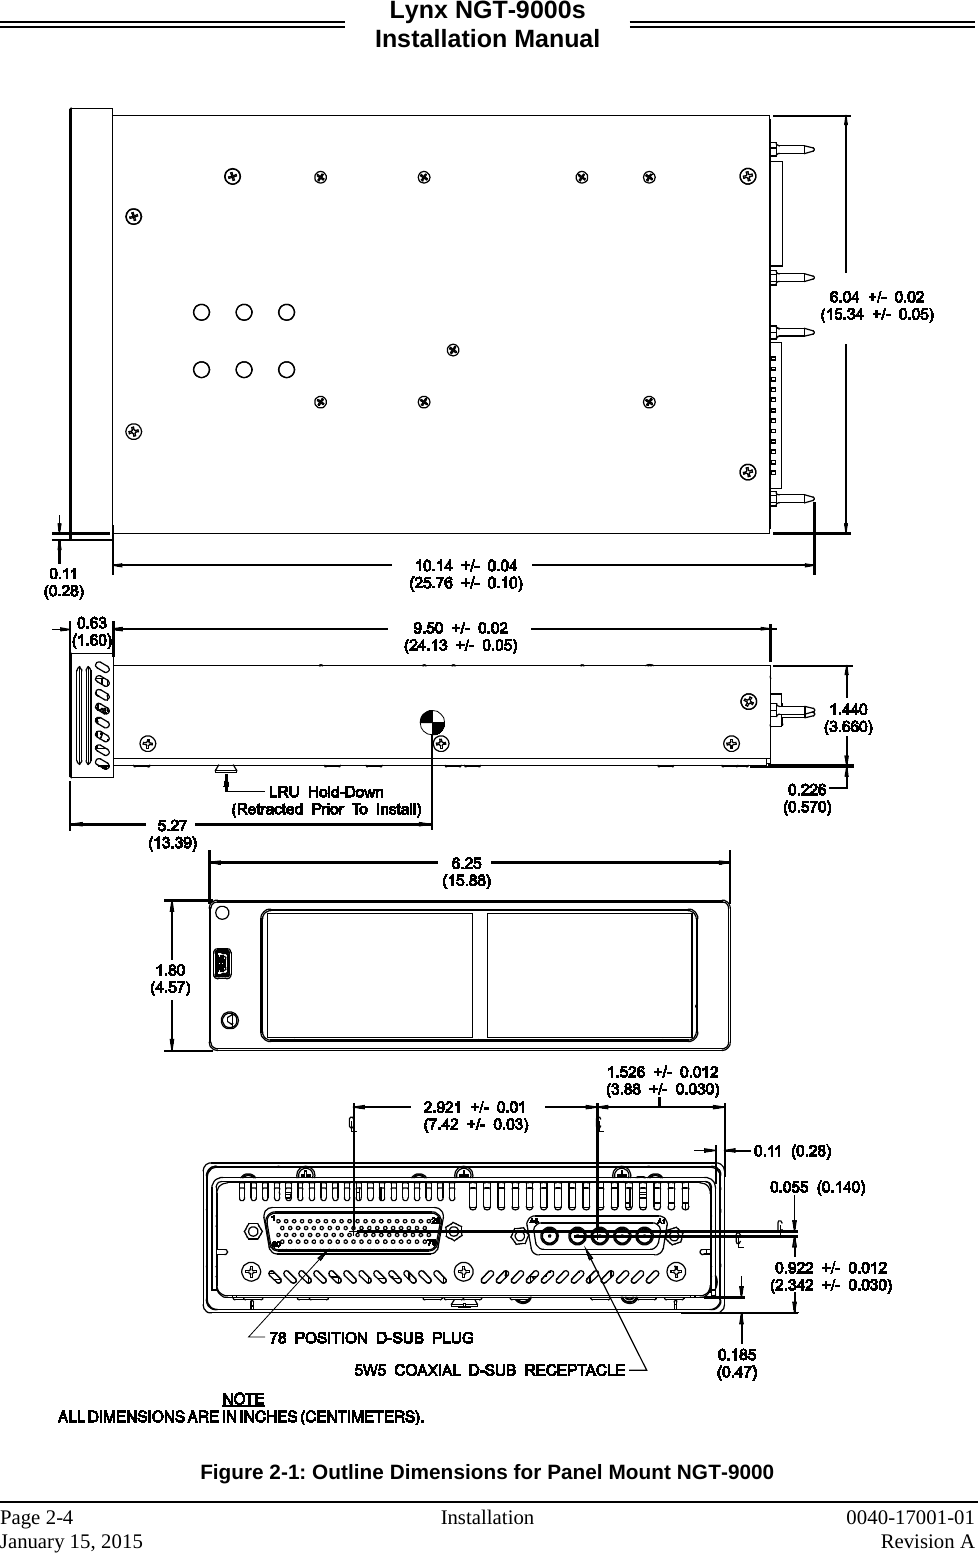 Lynx NGT-9000s Installation Manual     Figure 2-1: Outline Dimensions for Panel Mount NGT-9000   Page 2-4  Installation 0040-17001-01 January 15, 2015    Revision A  